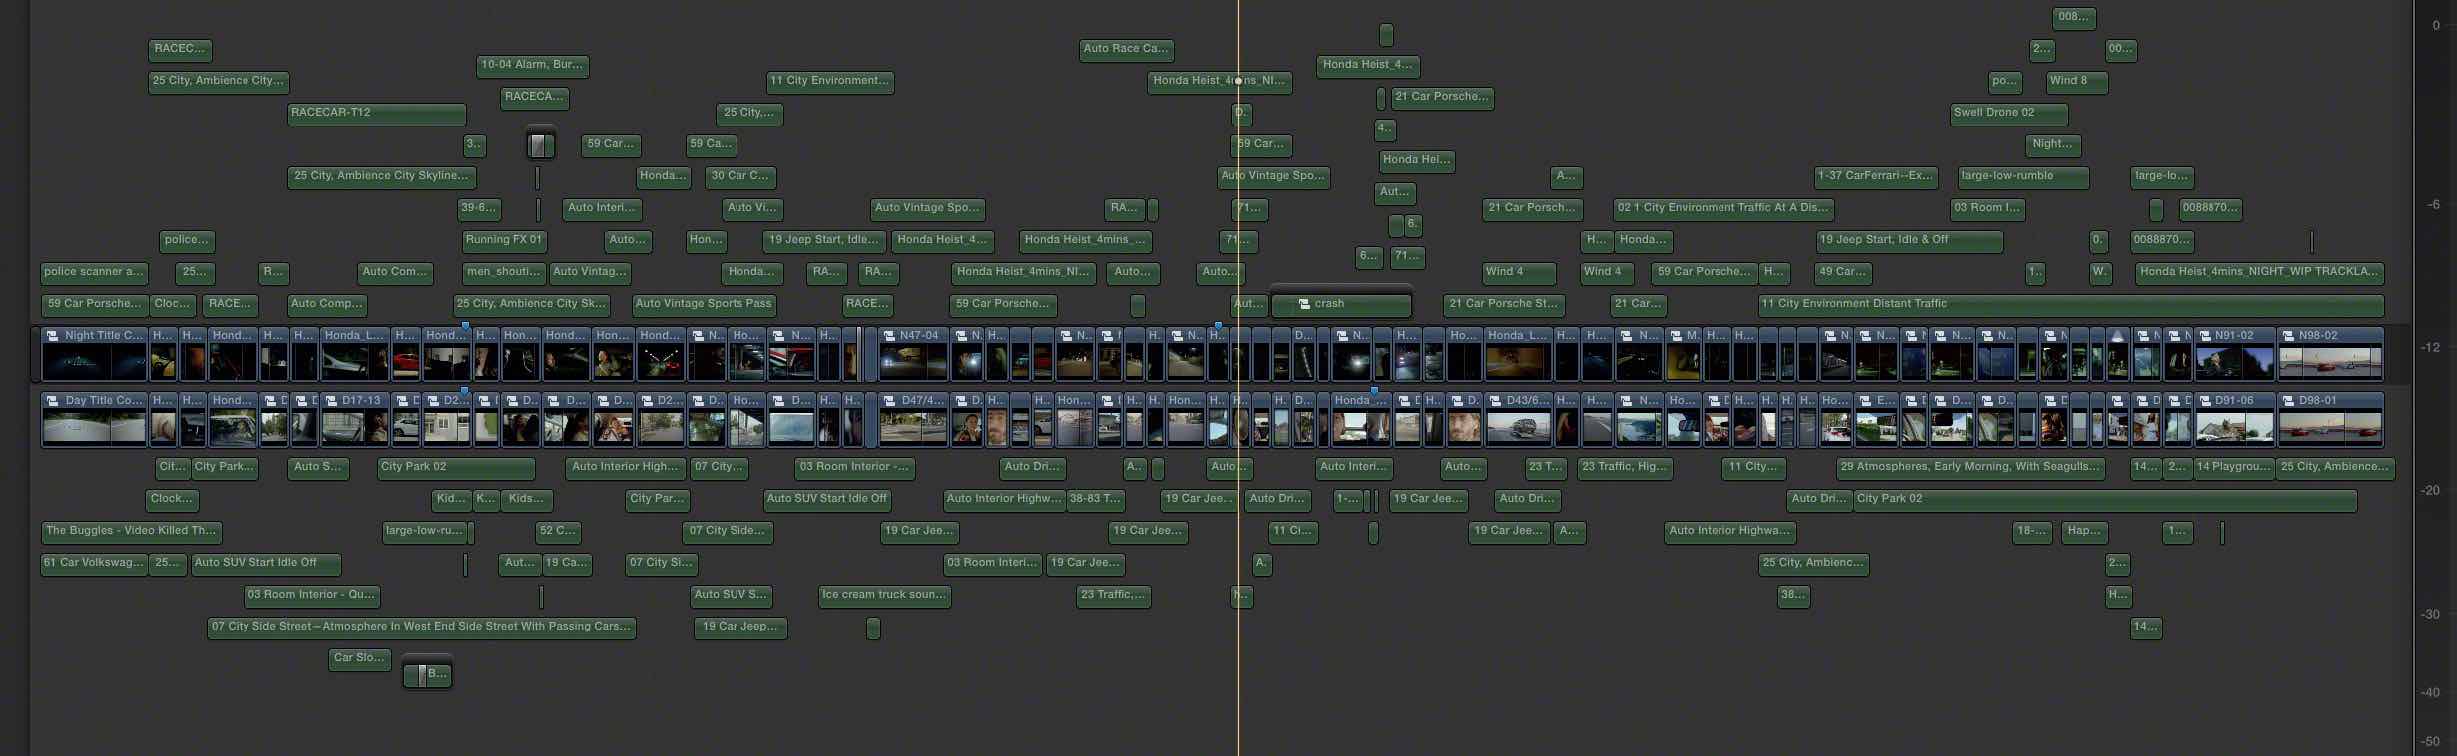 editing in fcpx like thomas grove carter